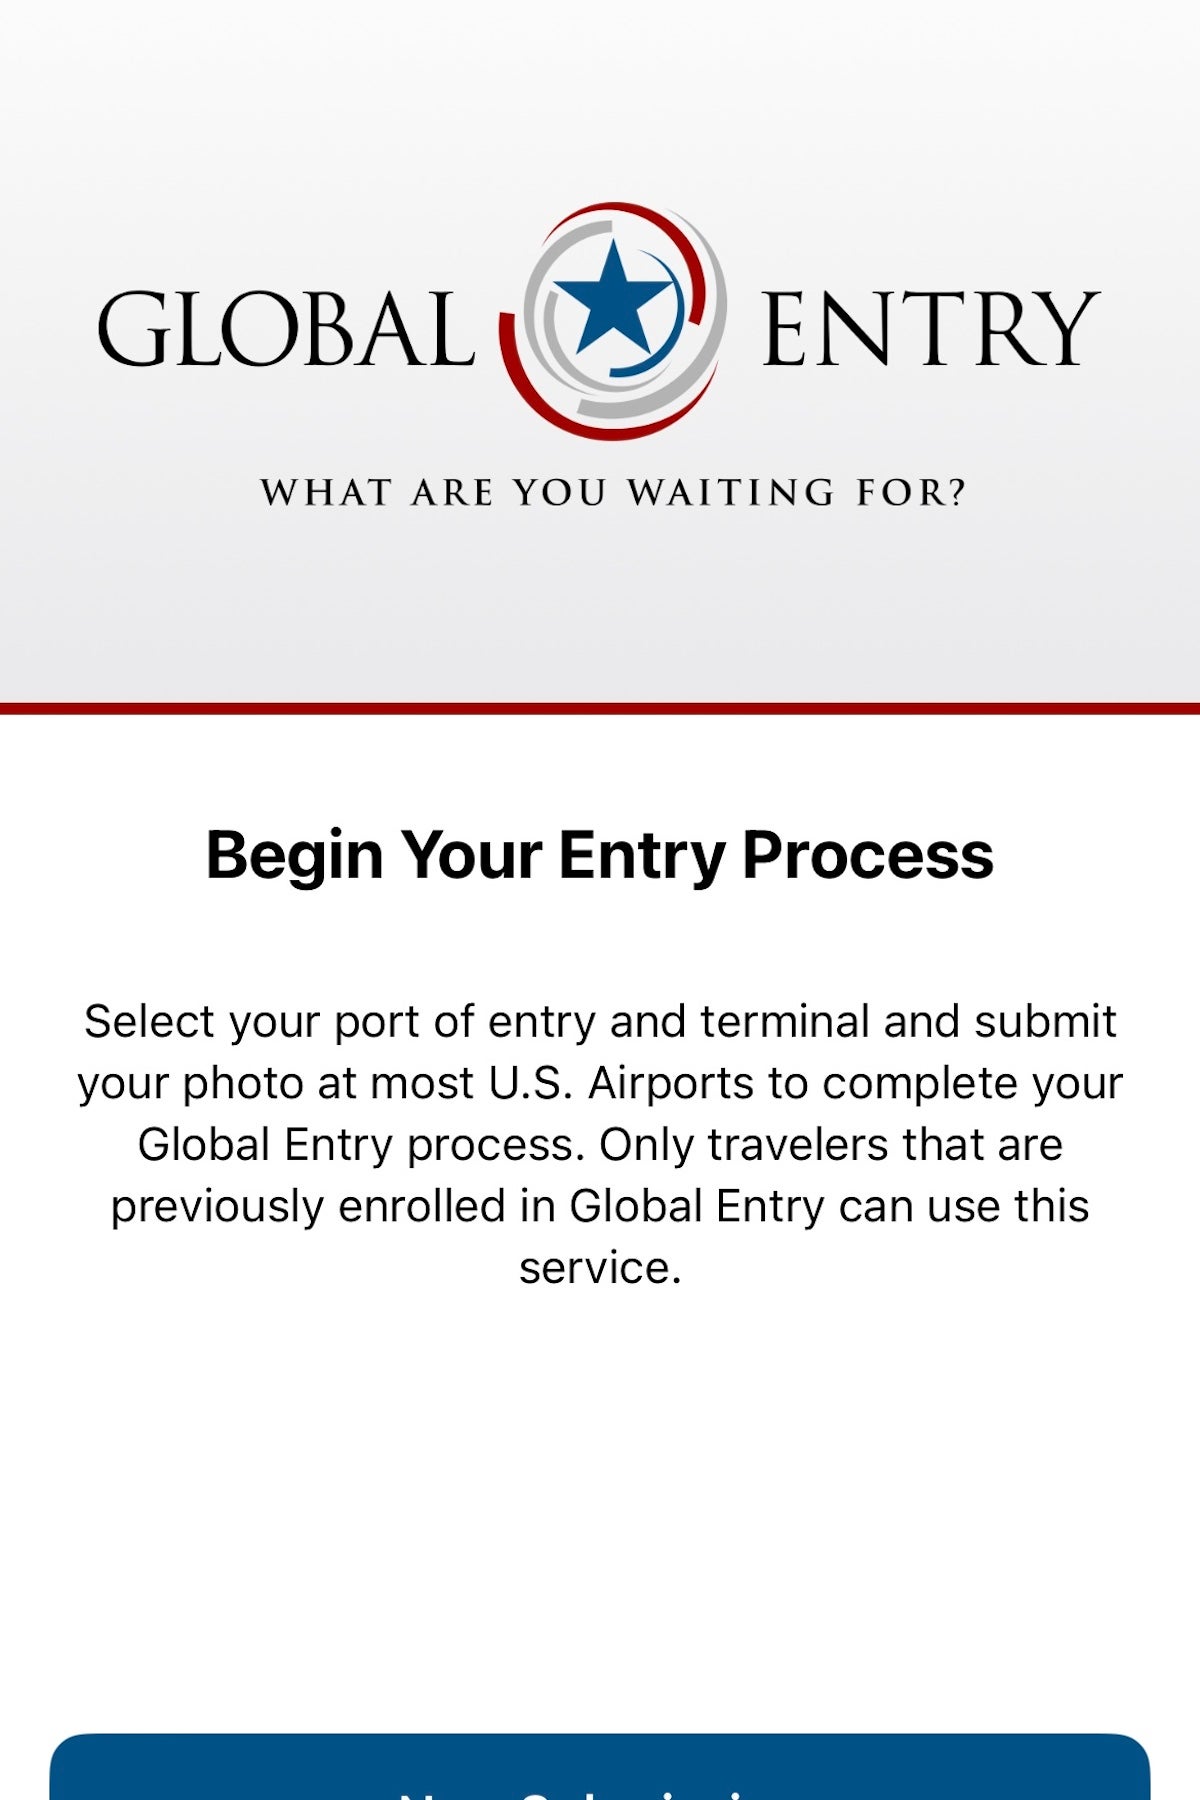 How to get a new Global Entry card - The Points Guy